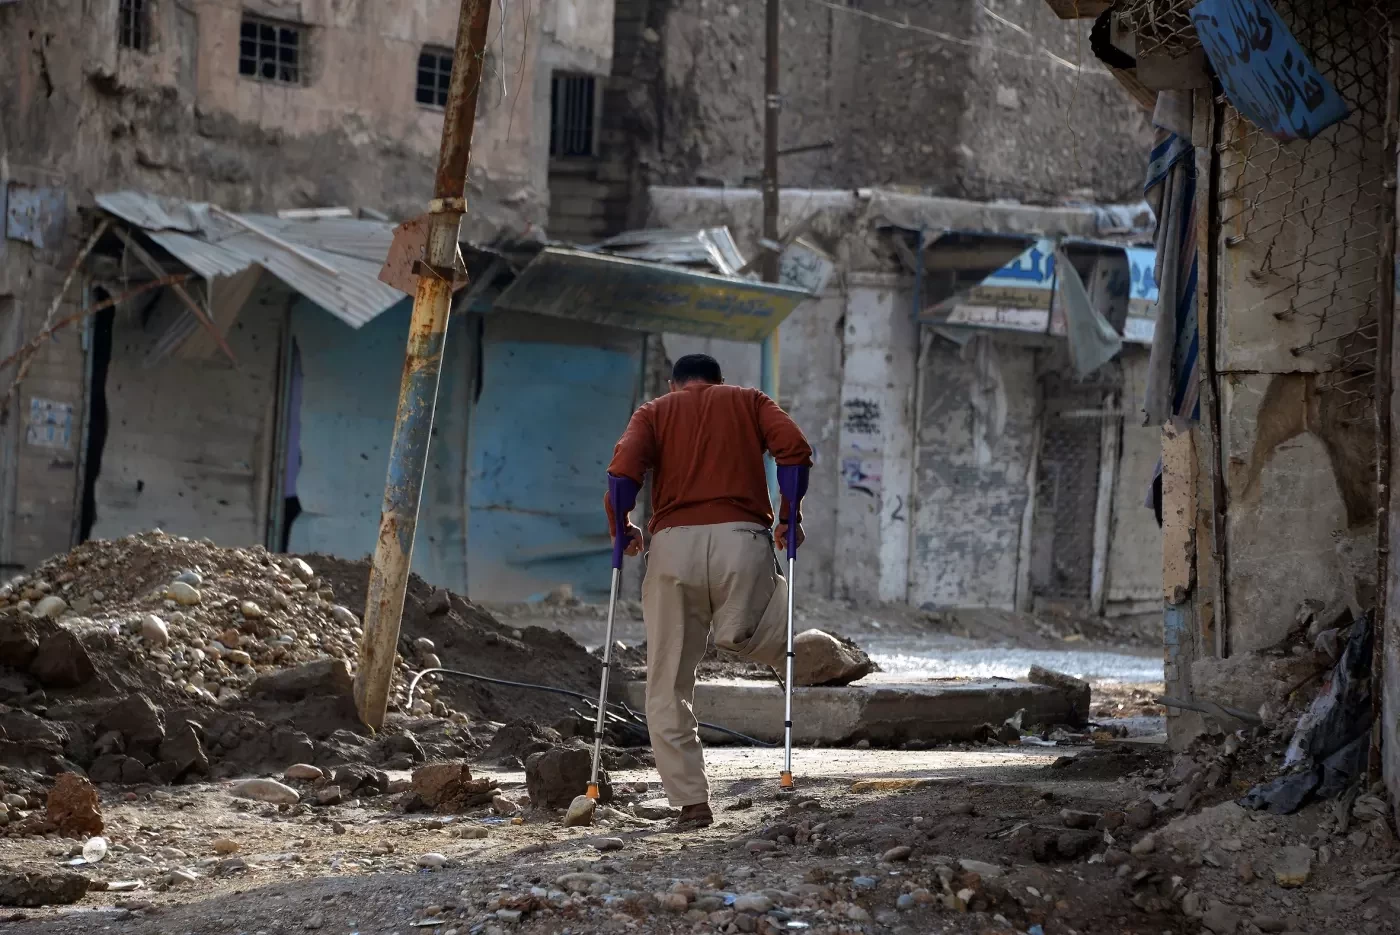 Iraqis with disabilities struggle to find employment: HRW Image